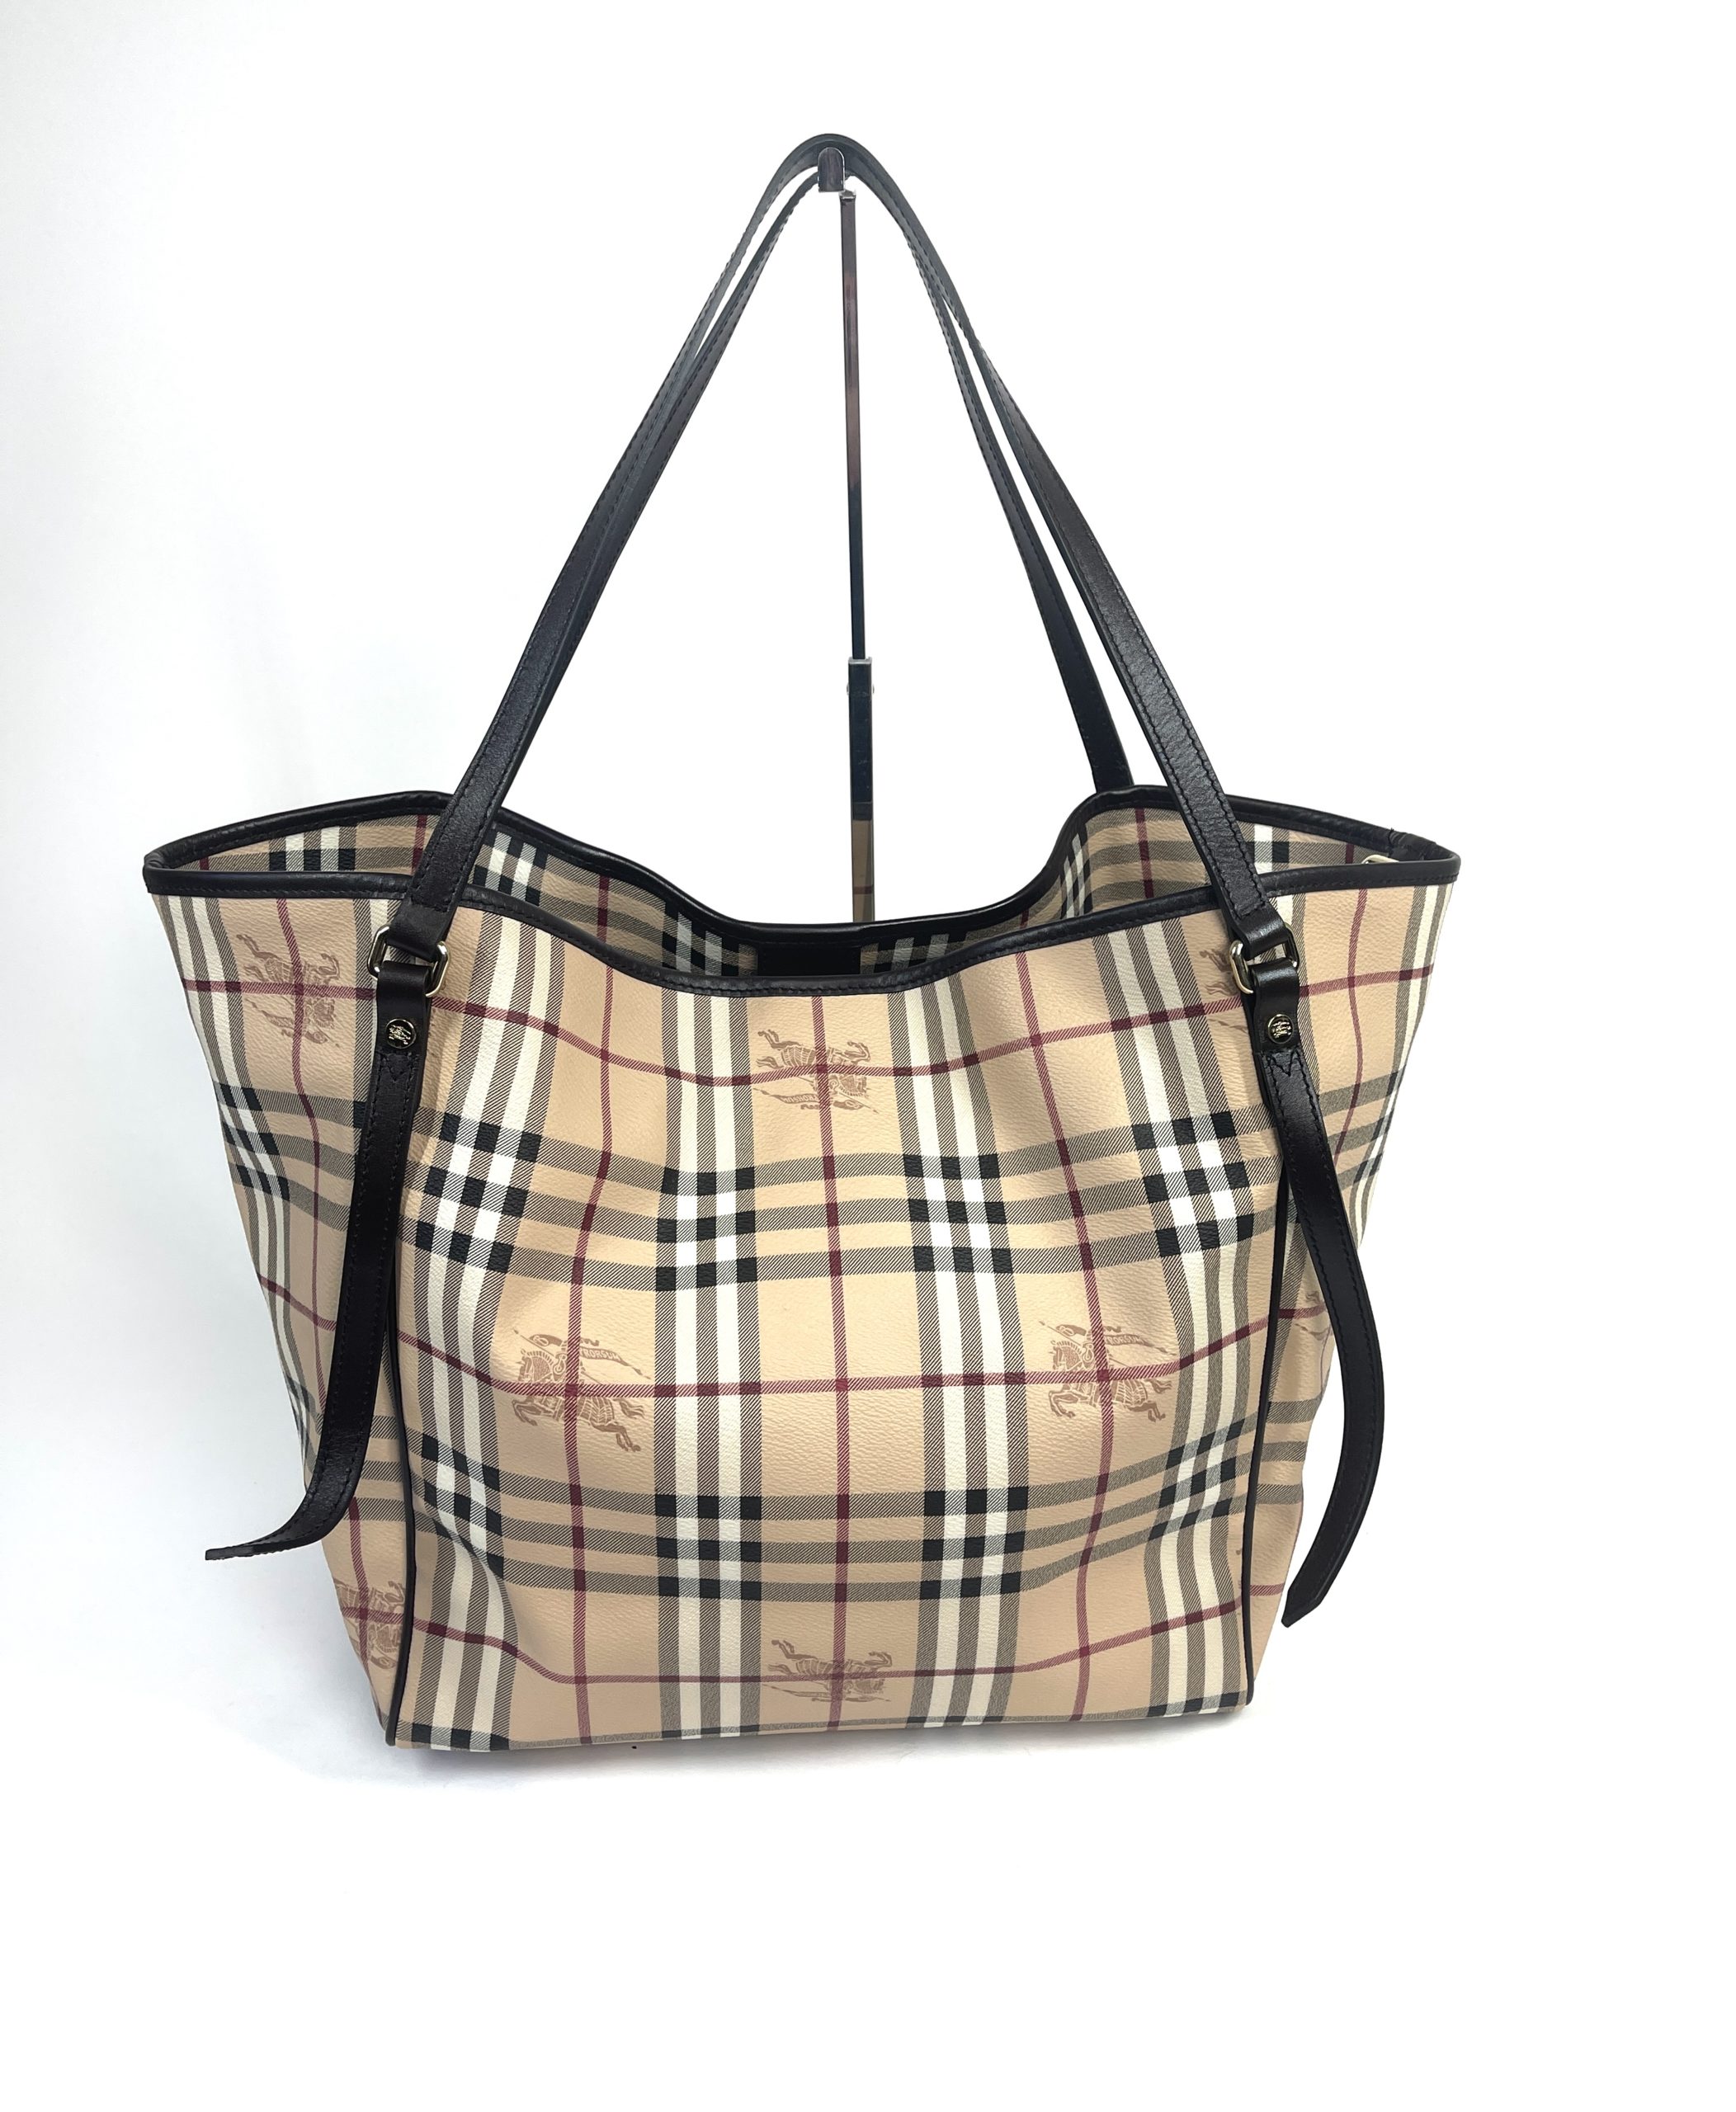 Bags, Burberry Large Neverfull Tote Bag